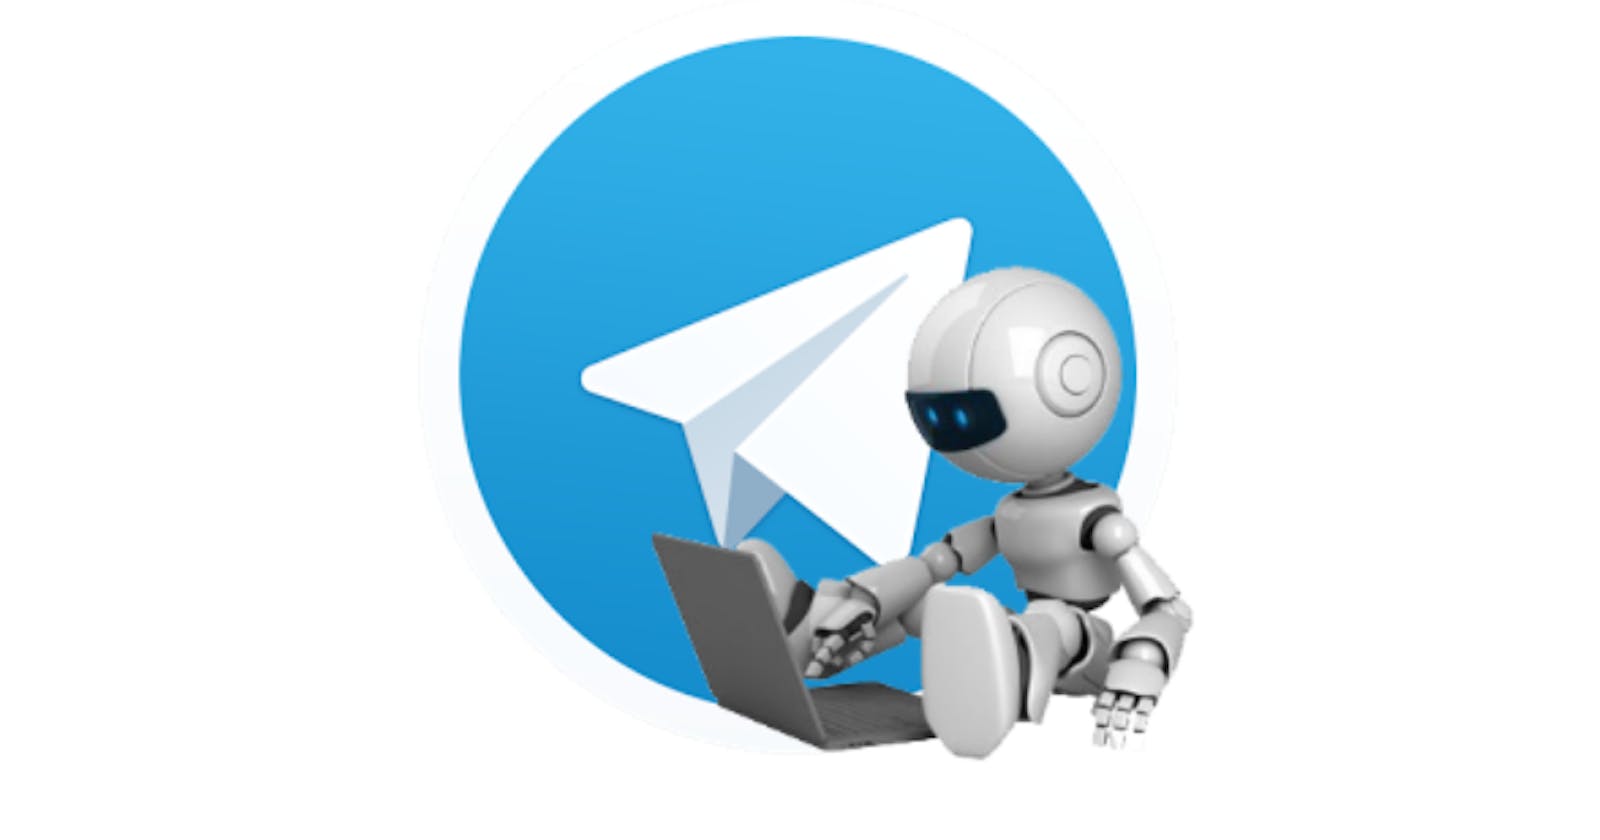 How to create and deploy a Telegram bot?
(Python)